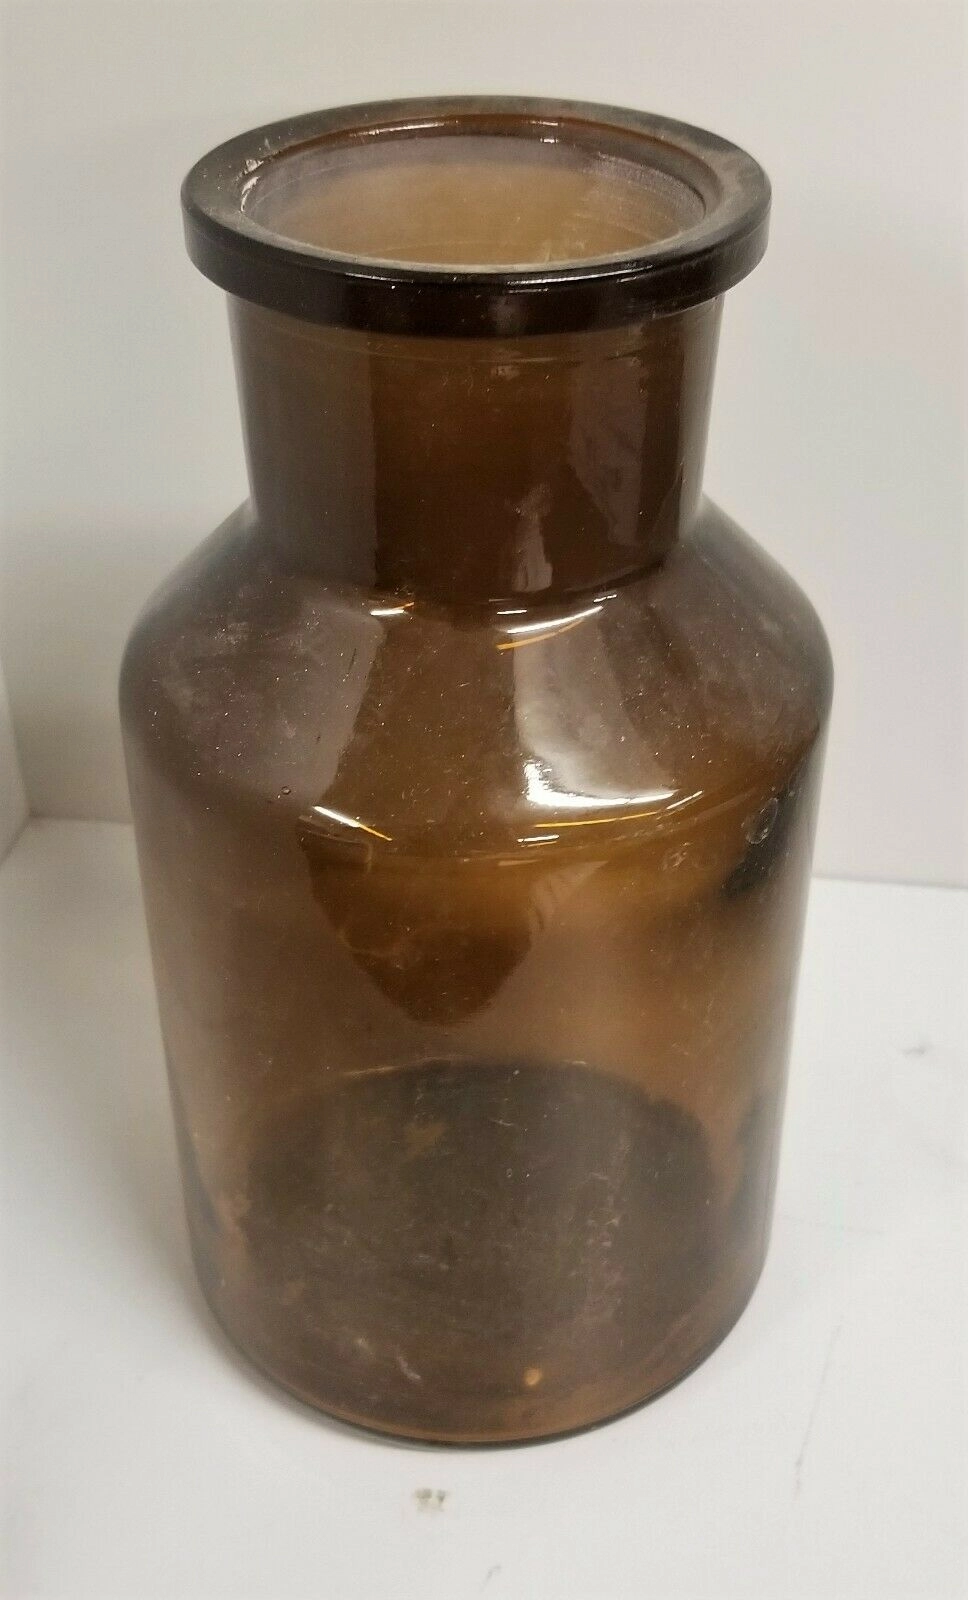 Used Corning PYREX 1368-160 Milk Dilution Bottle - 160mL for Sale